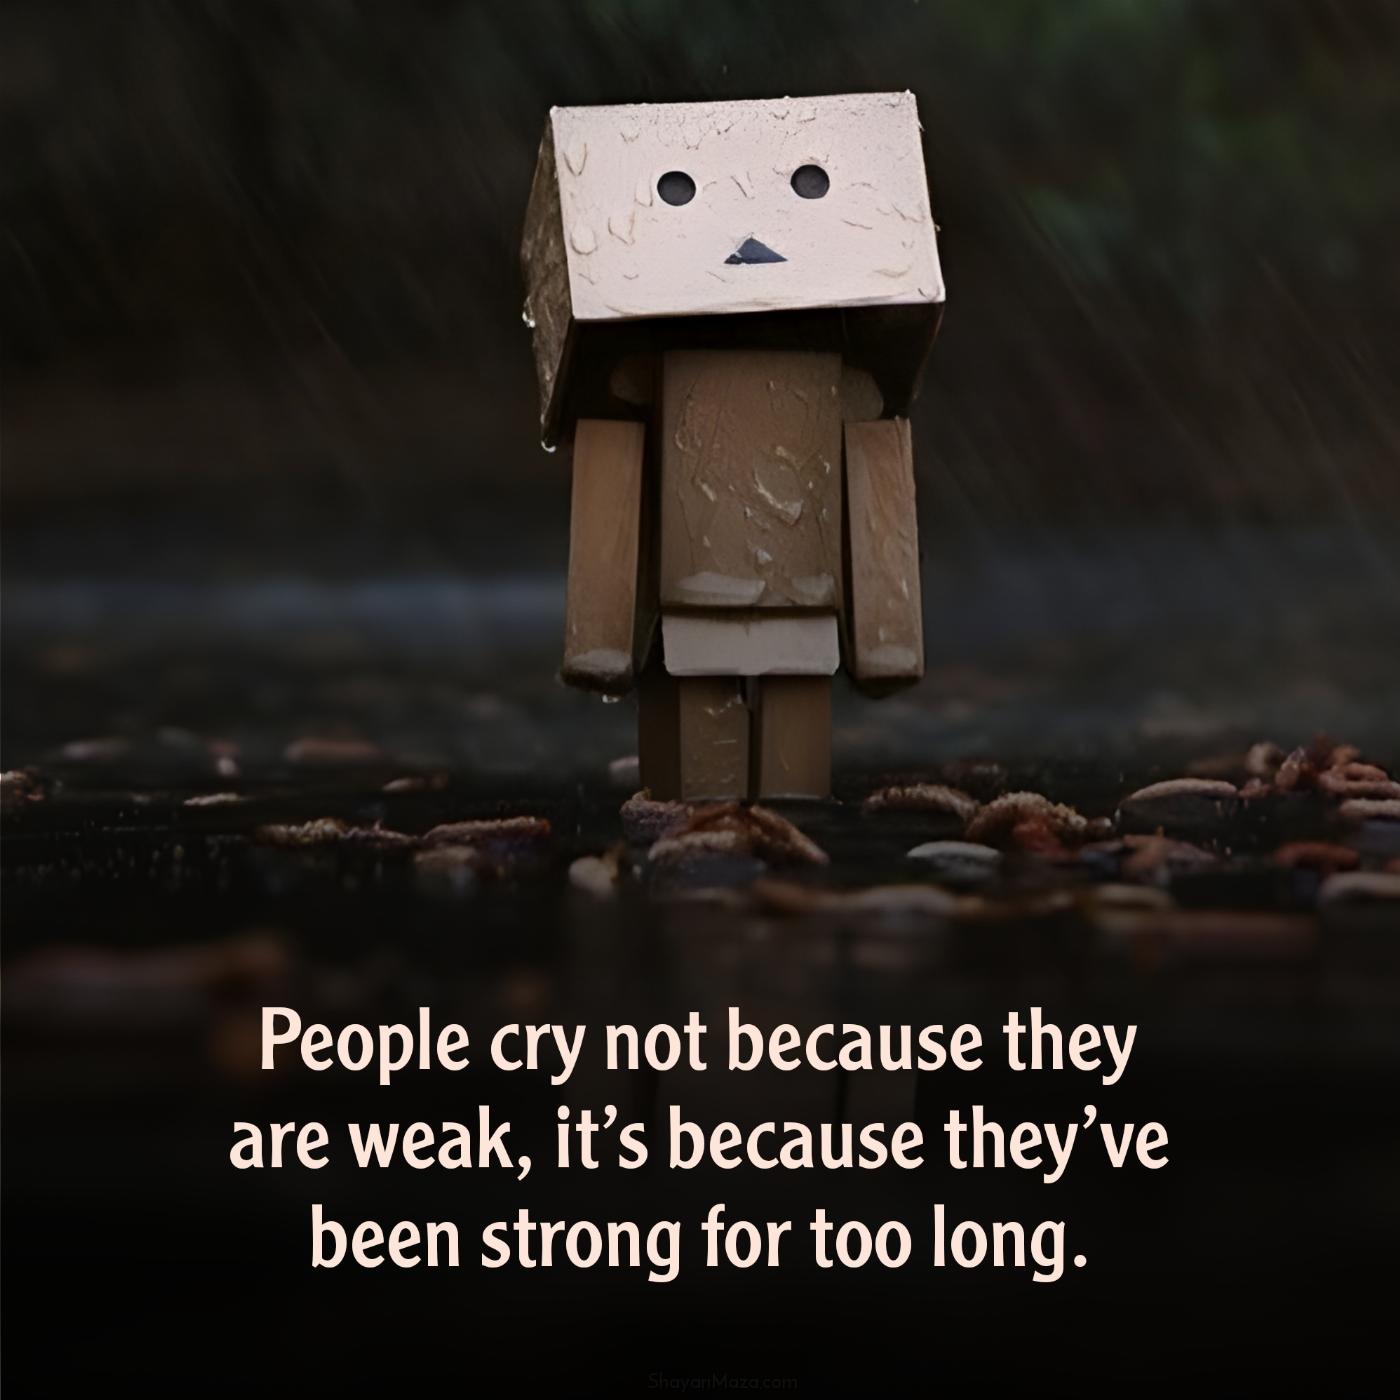 People cry not because they are weak